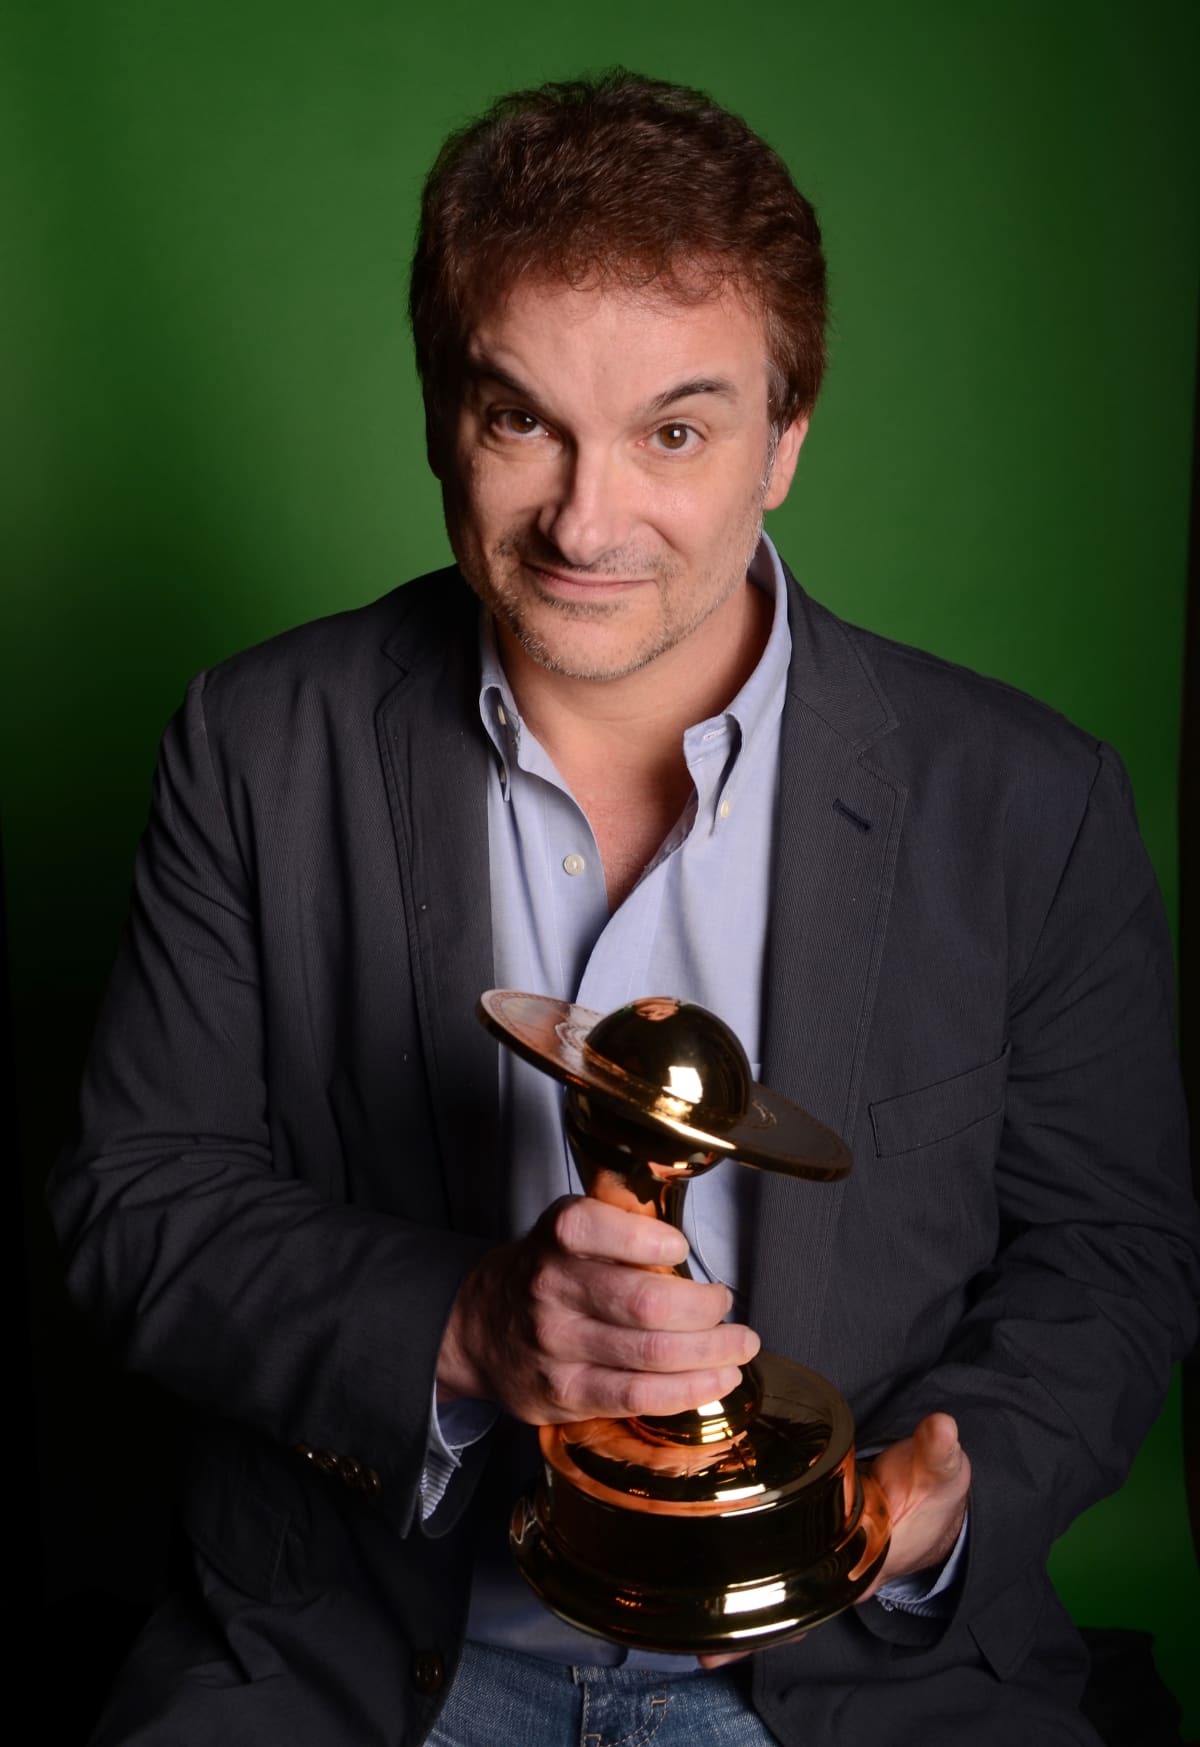 BURBANK, CA - JUNE 26:  Director Shane Black poses with the award for Best Actor in a Film for Robert Downey Jr. in 'Iron Man 3' at the 40th Annual Saturn Awards held at The Castaway on June 26, 2014 in Burbank, California.  (Photo by Jody Cortes/Getty Images)